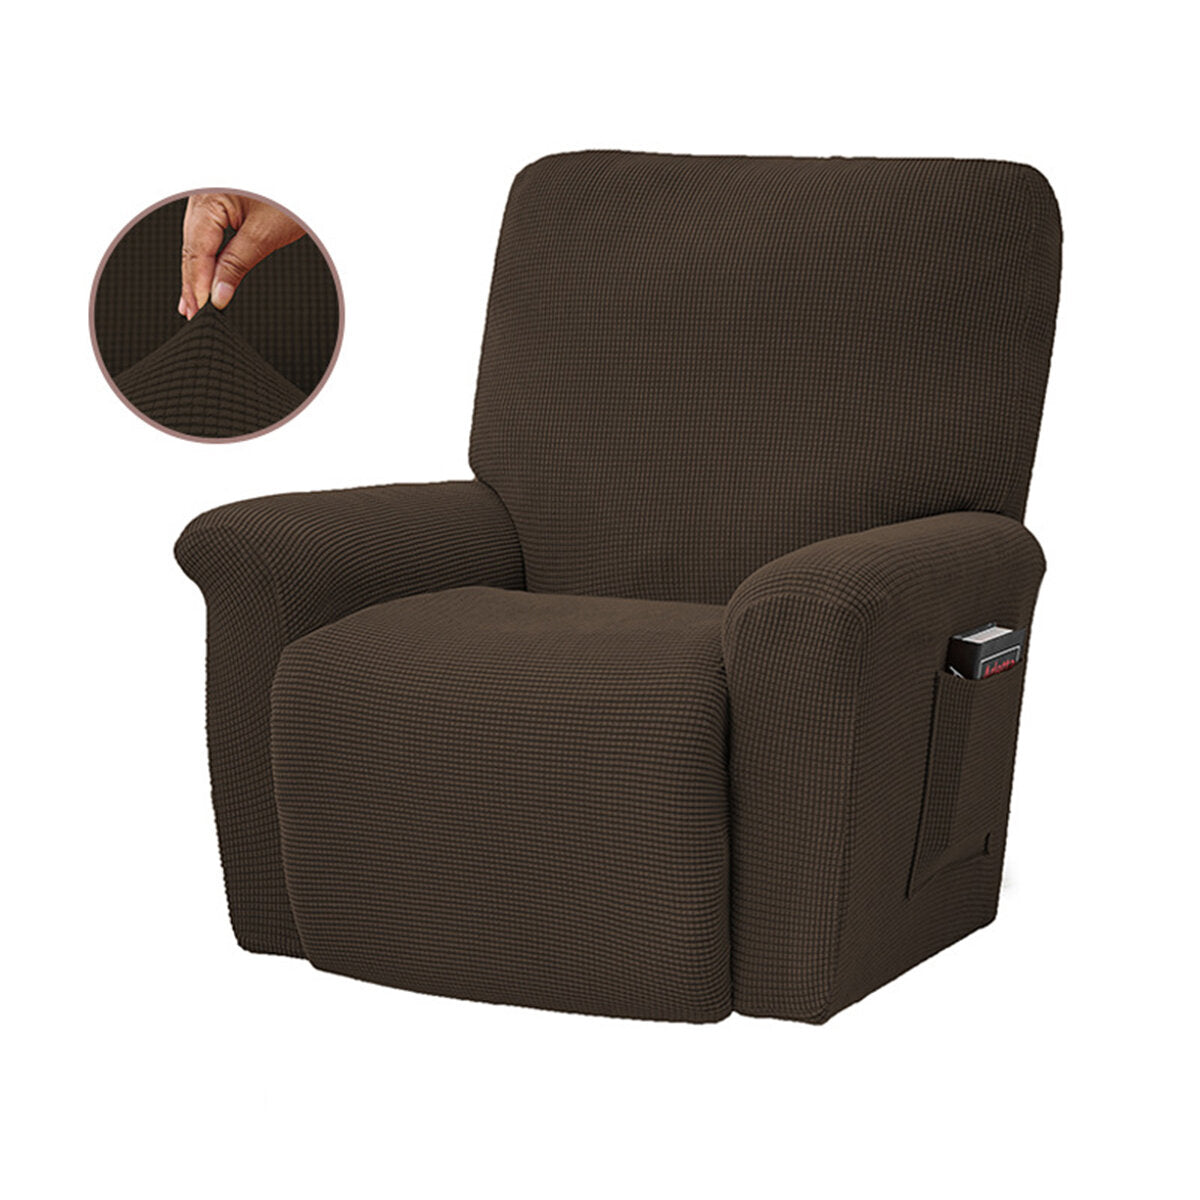 Recliner Chair Cover Full Coverage Elastic Sofa Seat Protector Stretch Dustproof Slipcover Armchair Cover Home Office Furniture Decorations